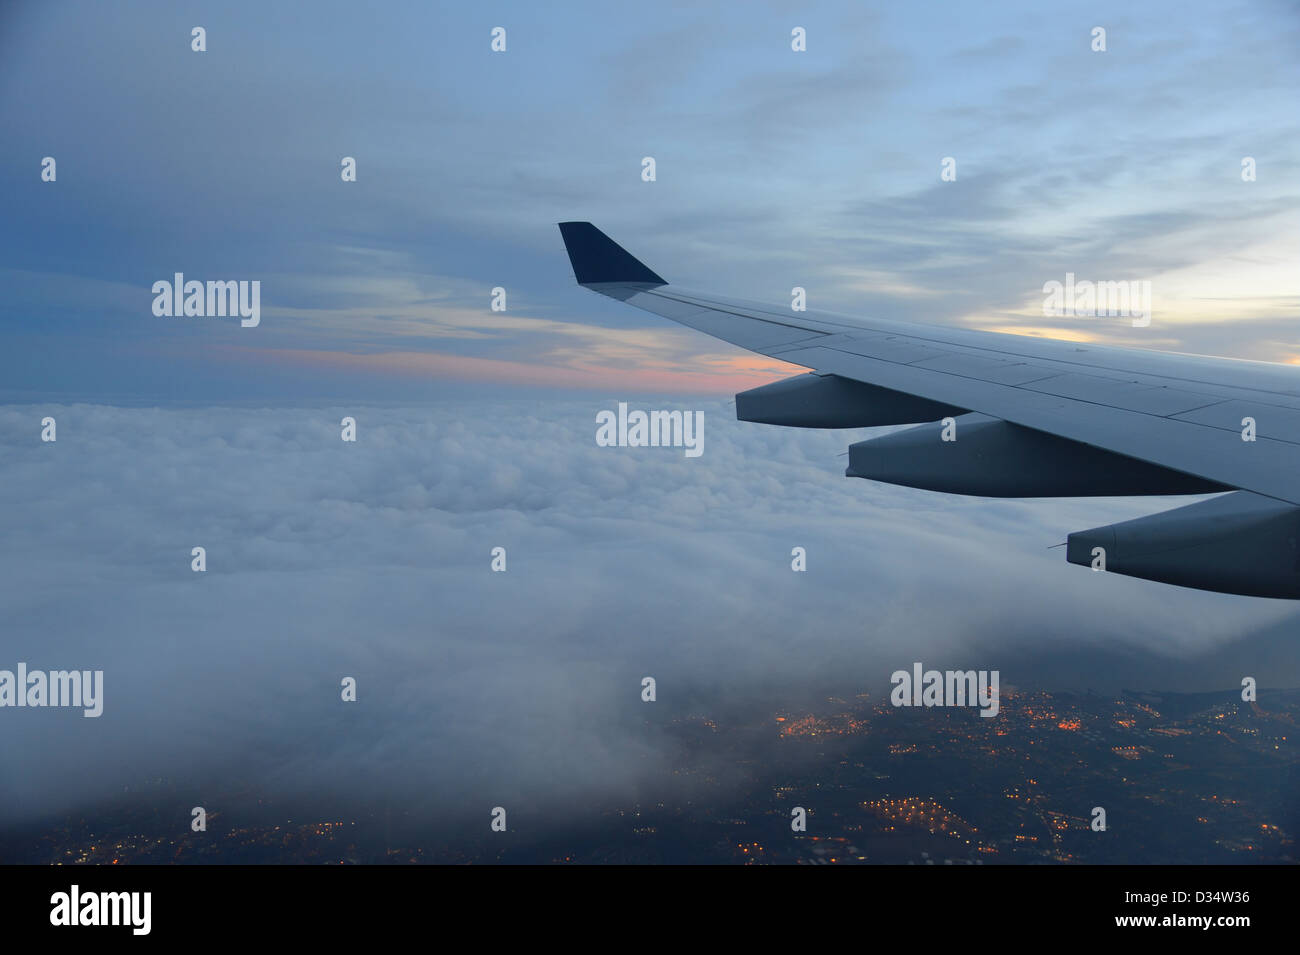 Airplane Wing & Sunset Clouds, City Lights Below Stock Photo